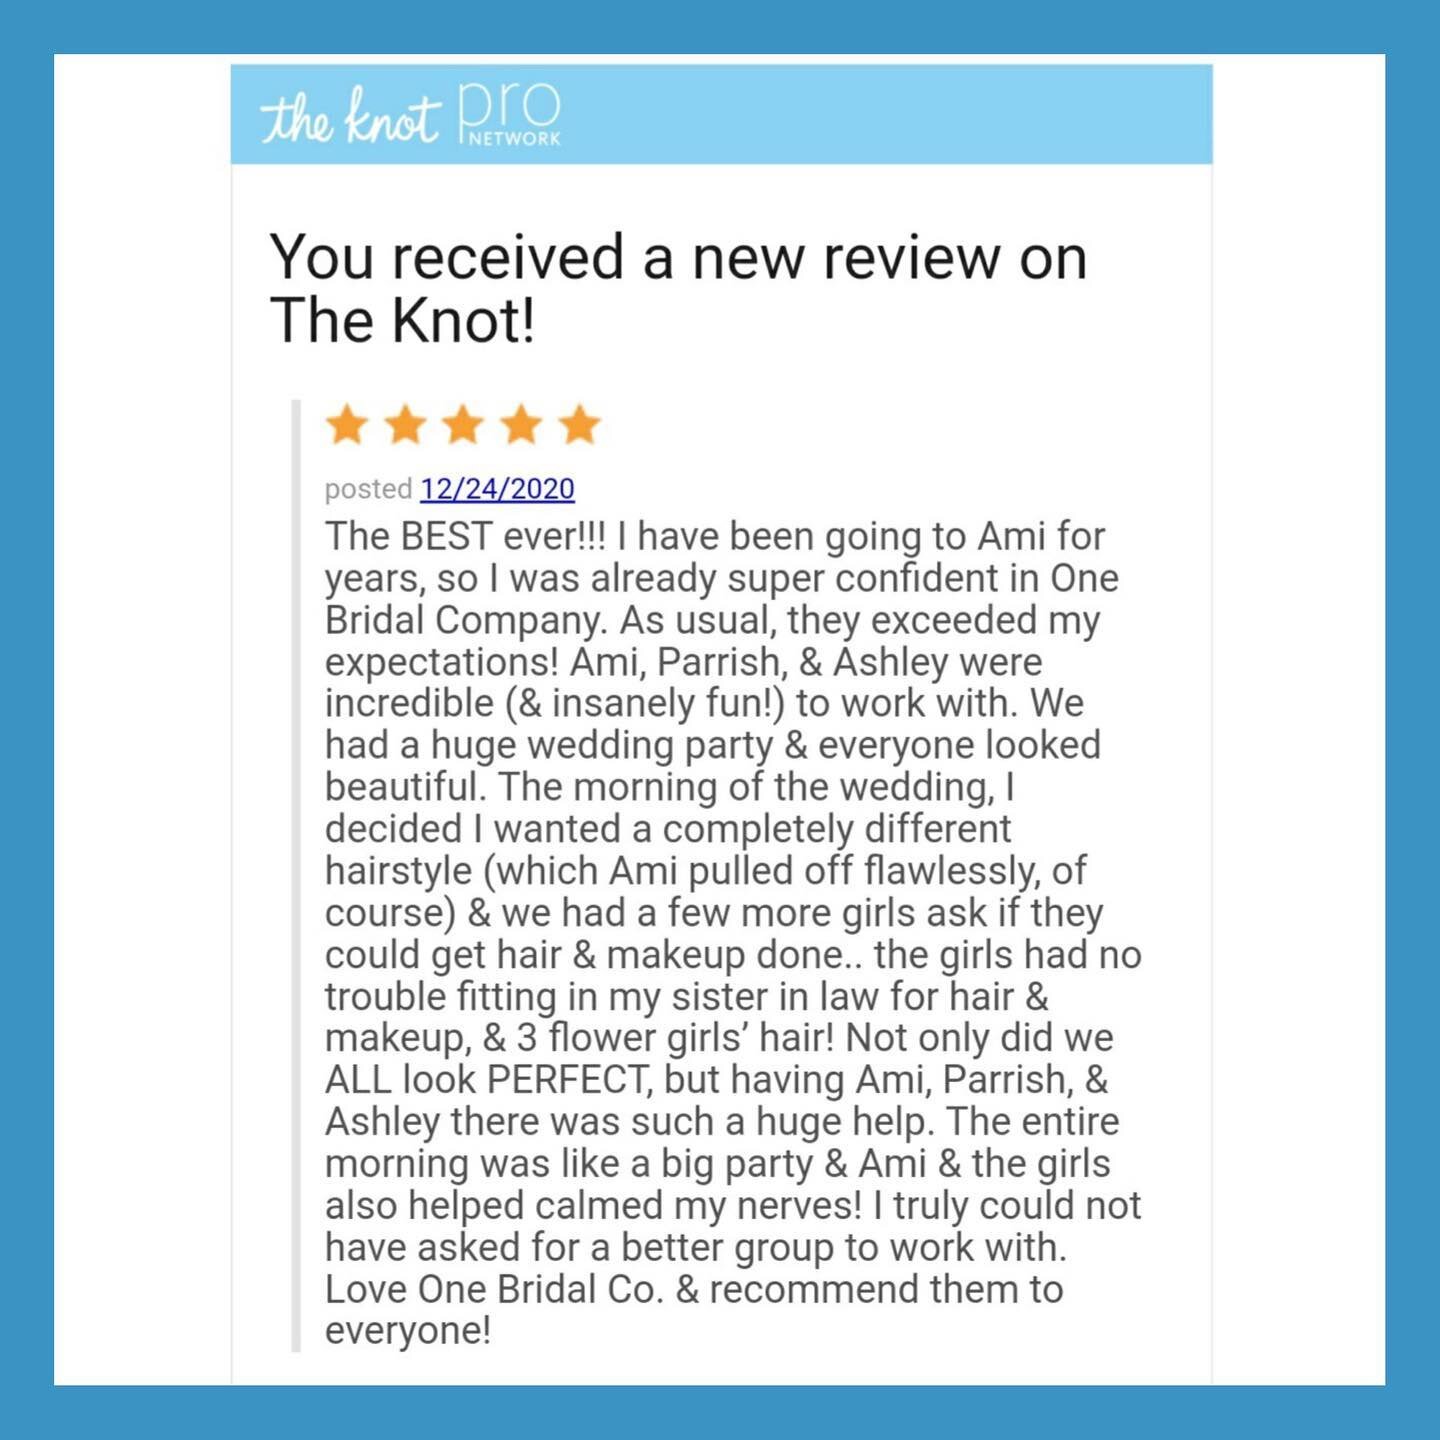 Another amazing review by a wonderful client! We appreciate ALL the feedback we get. It helps us grow and adjust accordingly. Become a #onesalonbride today and leave your personal experience for a chance to get featured on our page!✨
⠀⠀⠀⠀⠀⠀⠀⠀⠀
⠀
#one